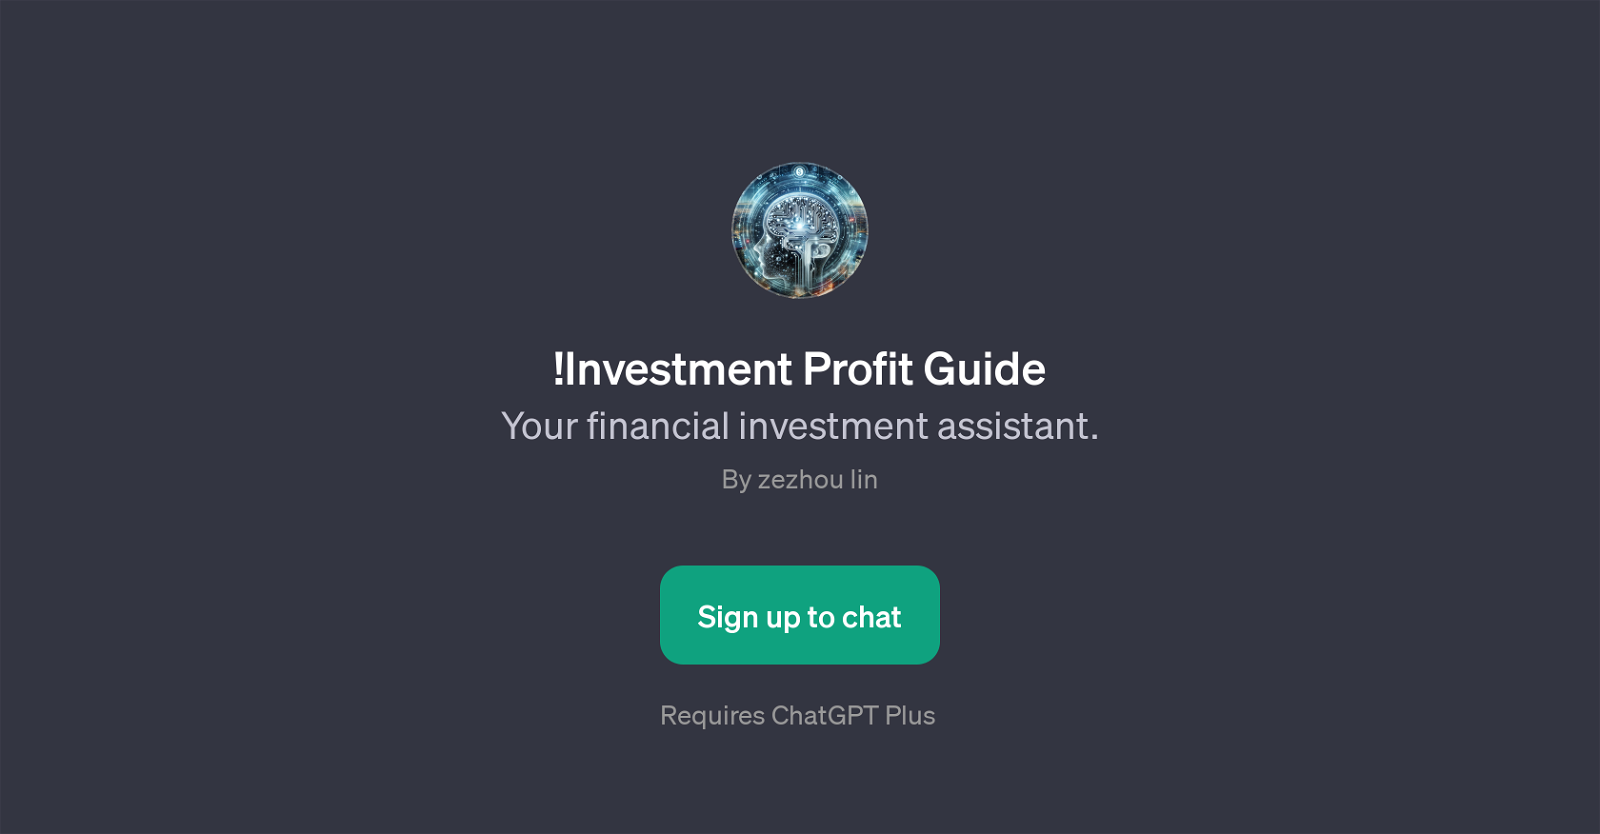 !Investment Profit Guide website